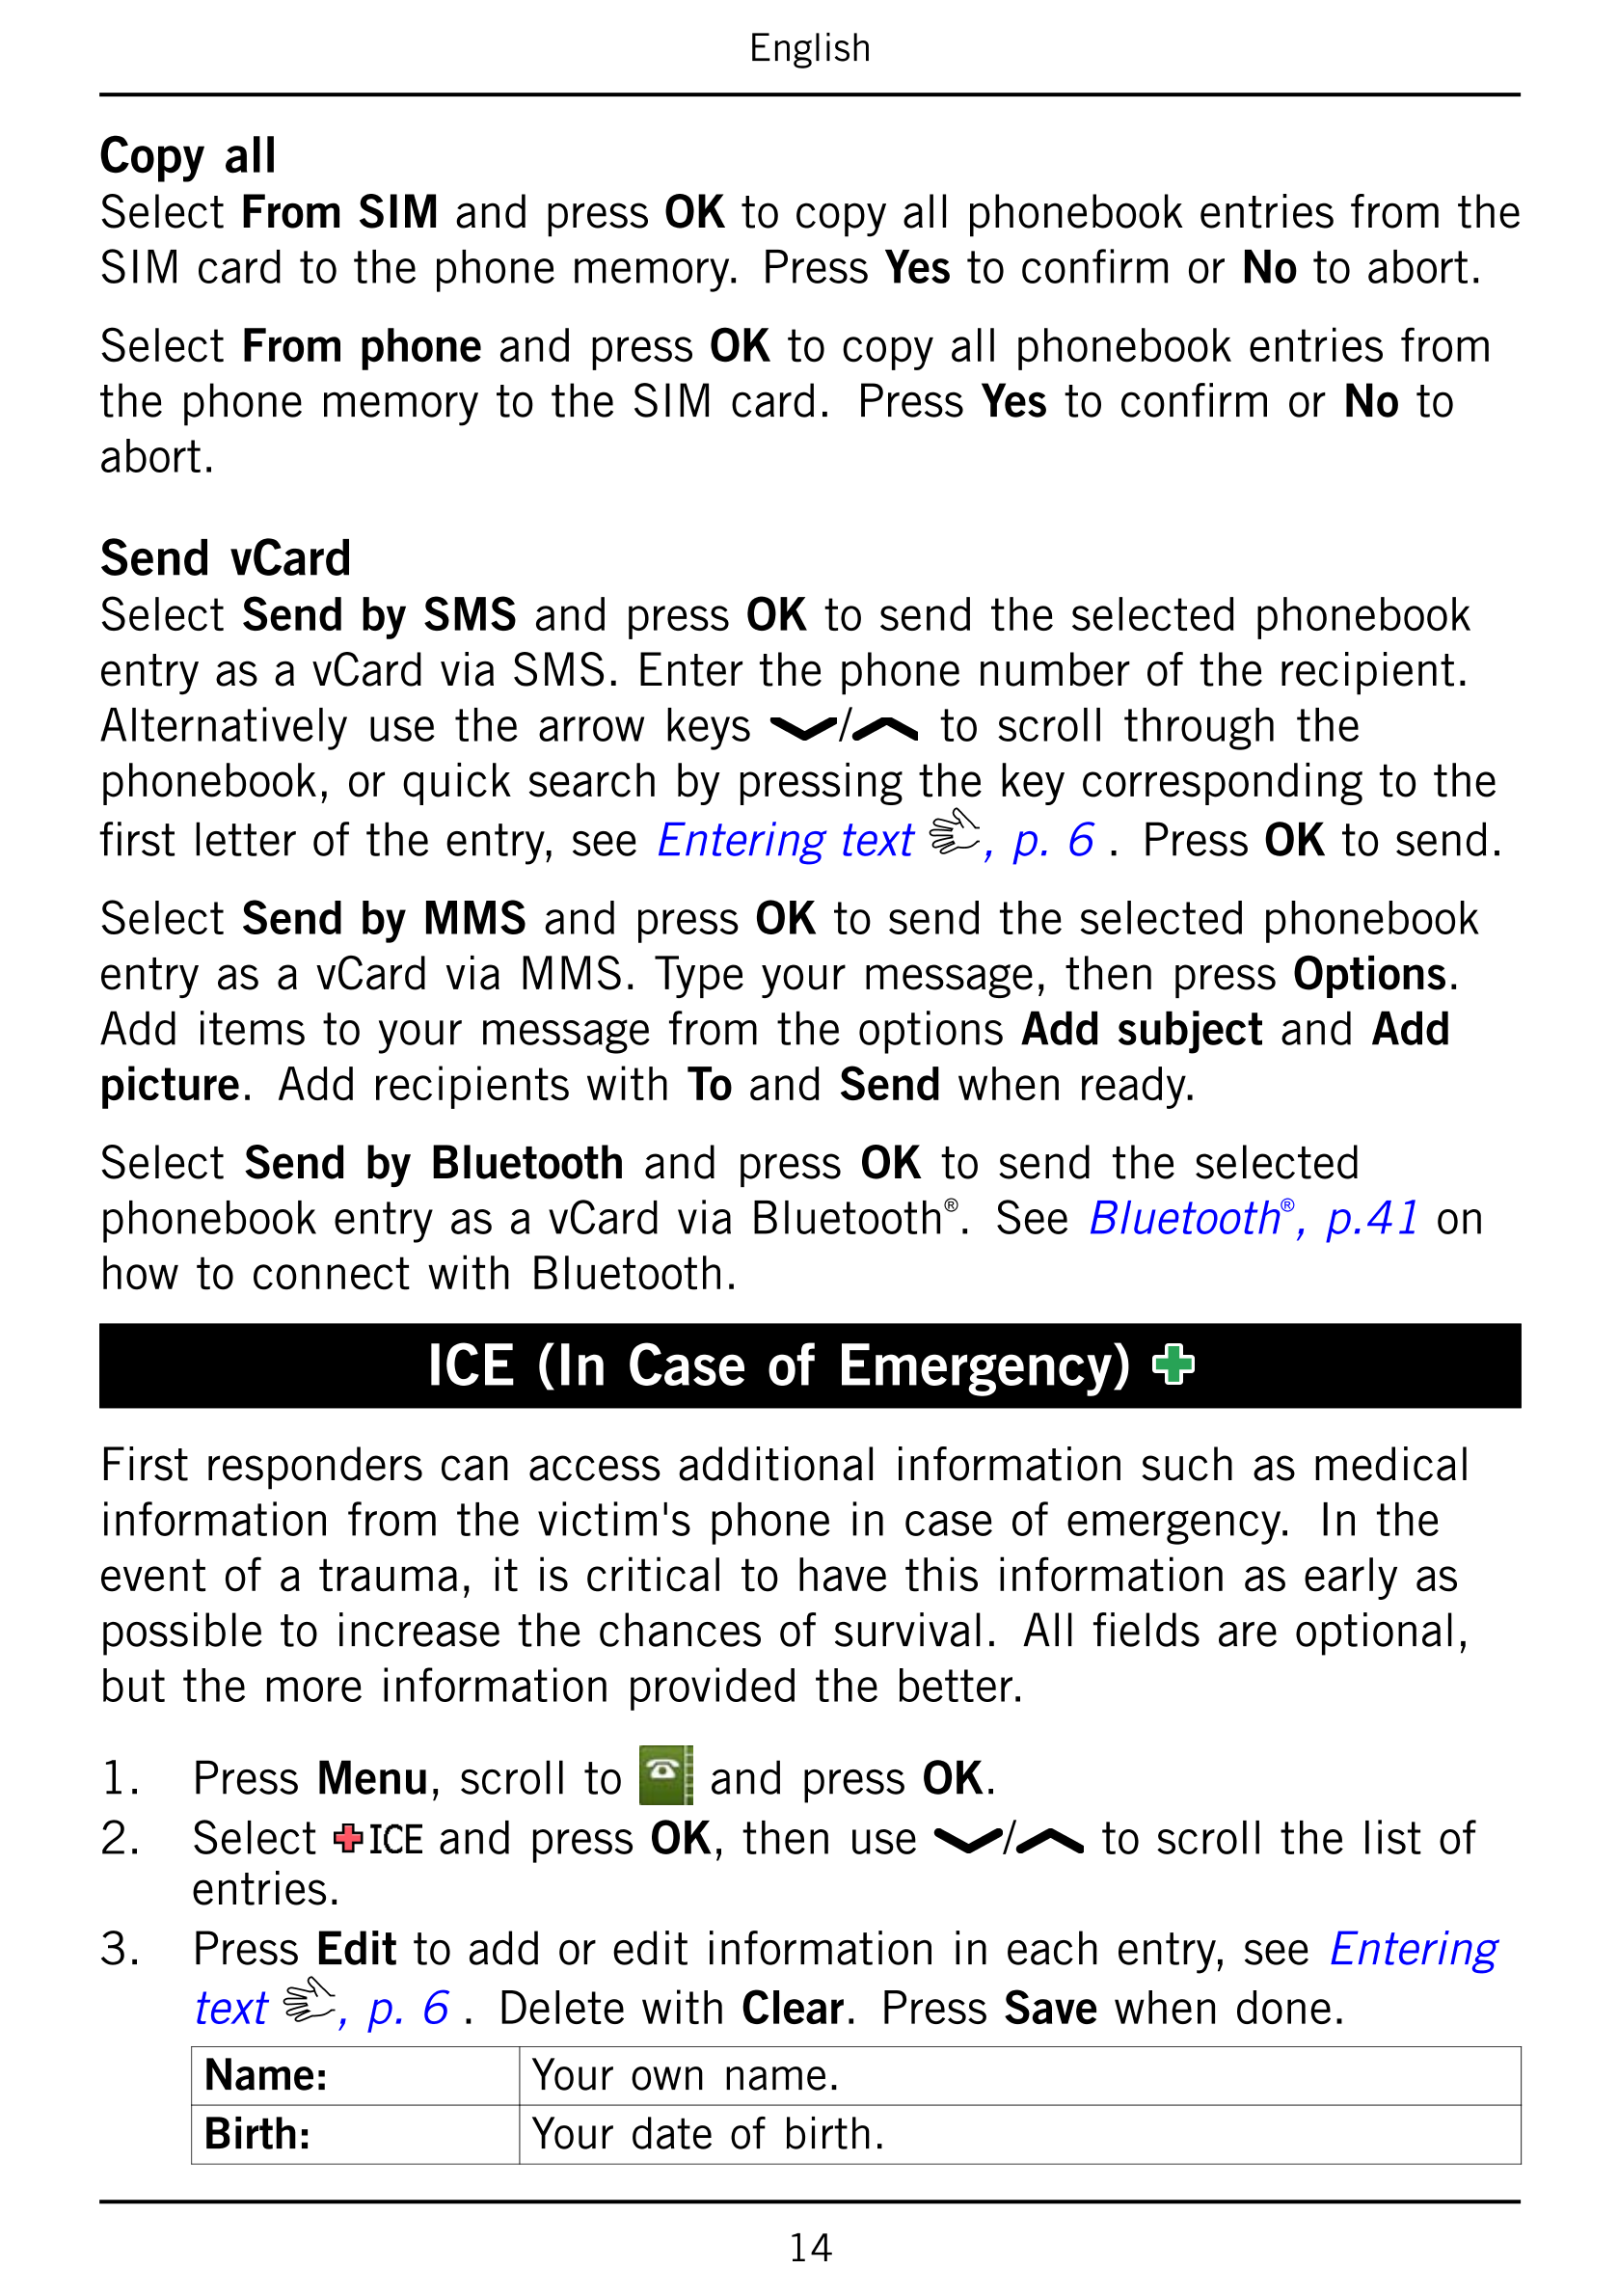 English
Copy all
Select From SIM and press OK to copy all phonebook entries from the
SIM card to the phone memory.  Press Yes to